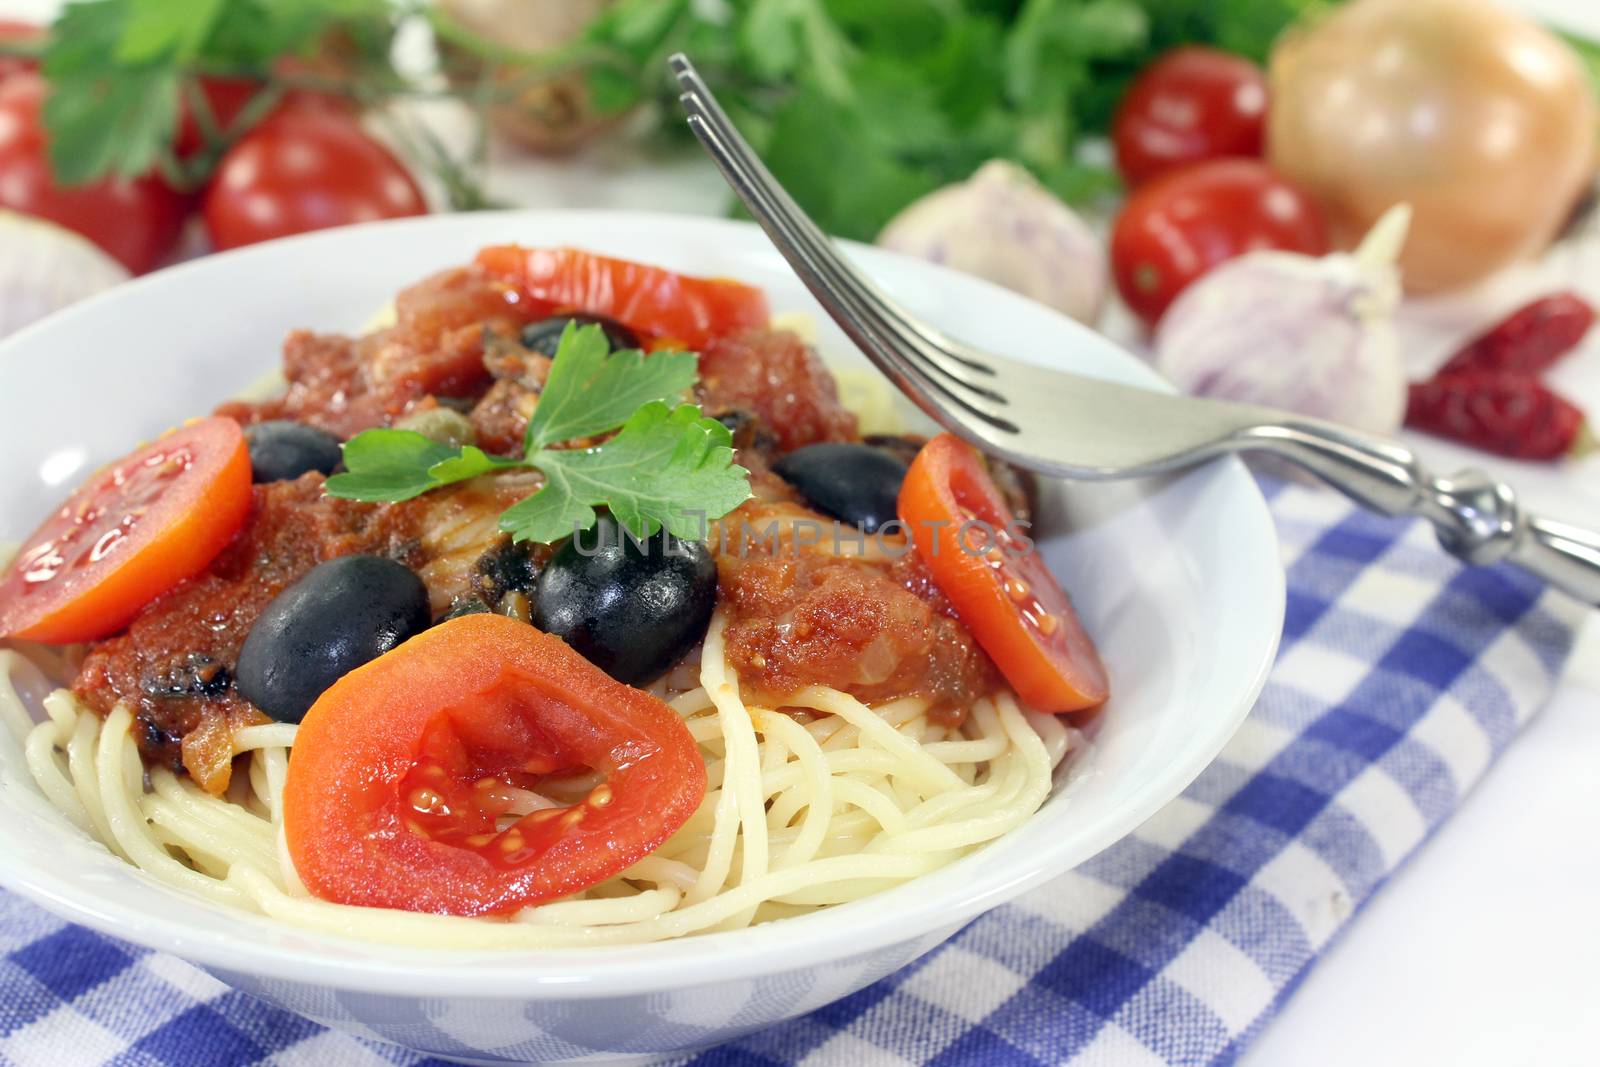 Capellini with tomatoes, anchovies, capers and olives